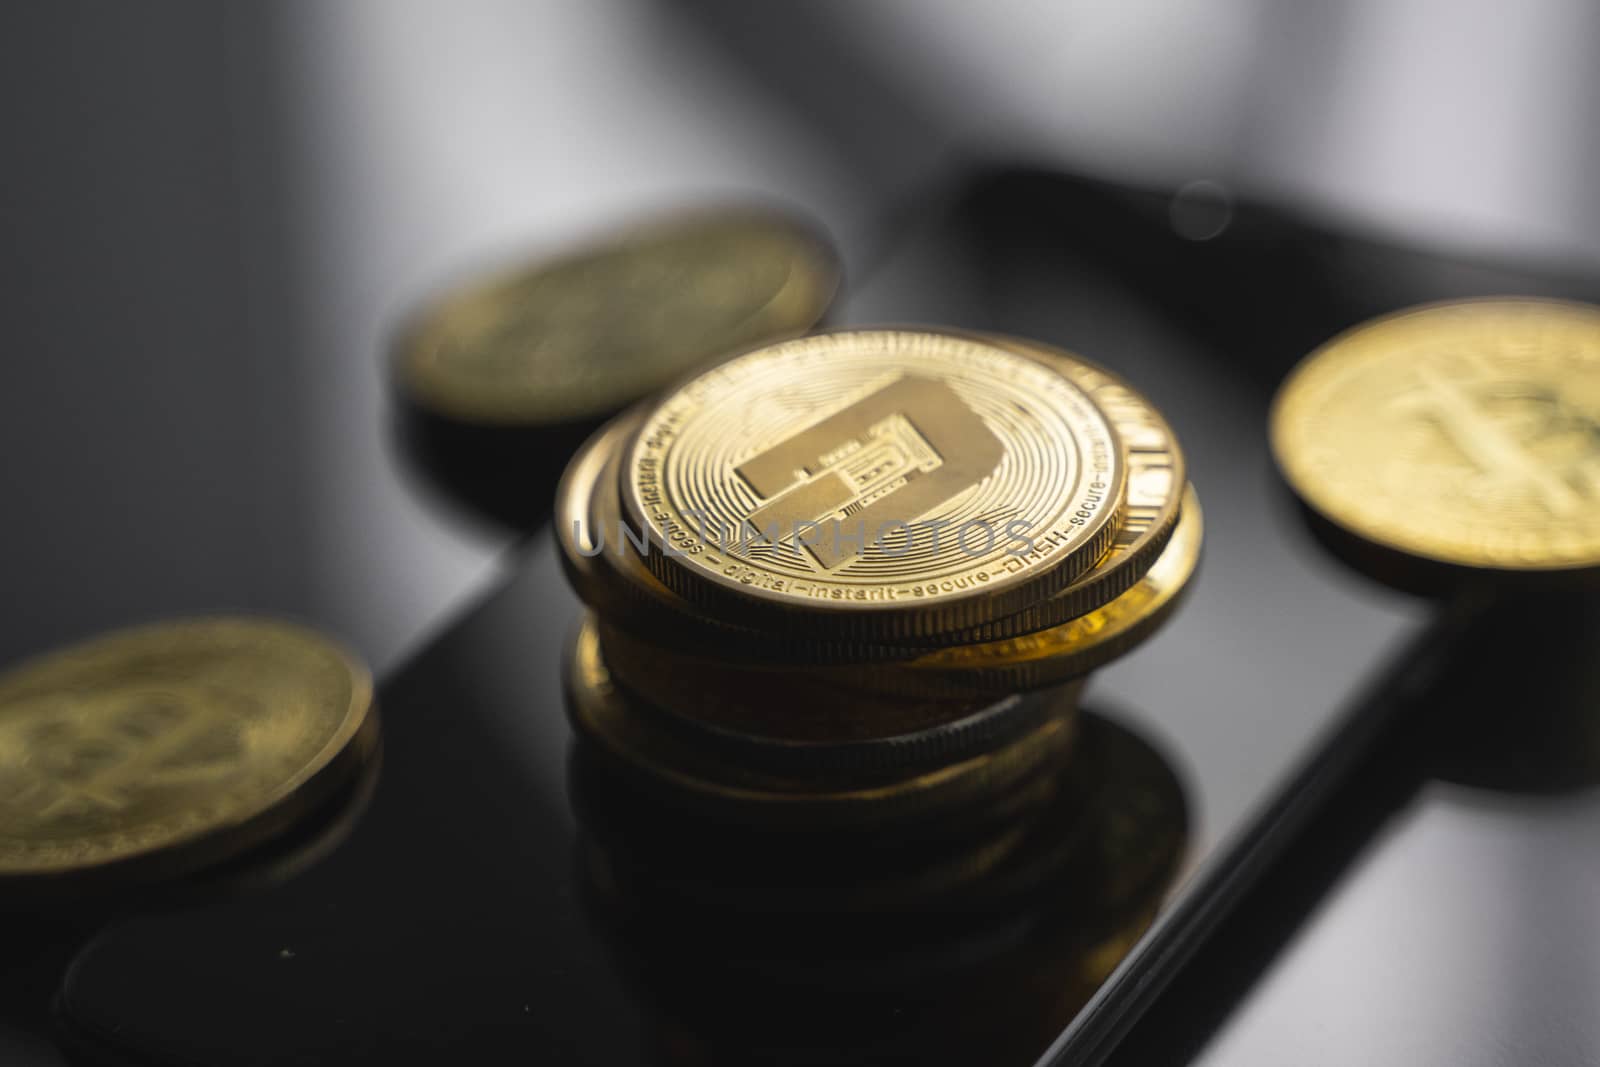 Stack of golden Dash bitcoin coin on a smartphone with a lot of bitcoins coins on a table. Virtual cryptocurrency concept. Mining of bitcoins online bussiness. Bitcoins trading